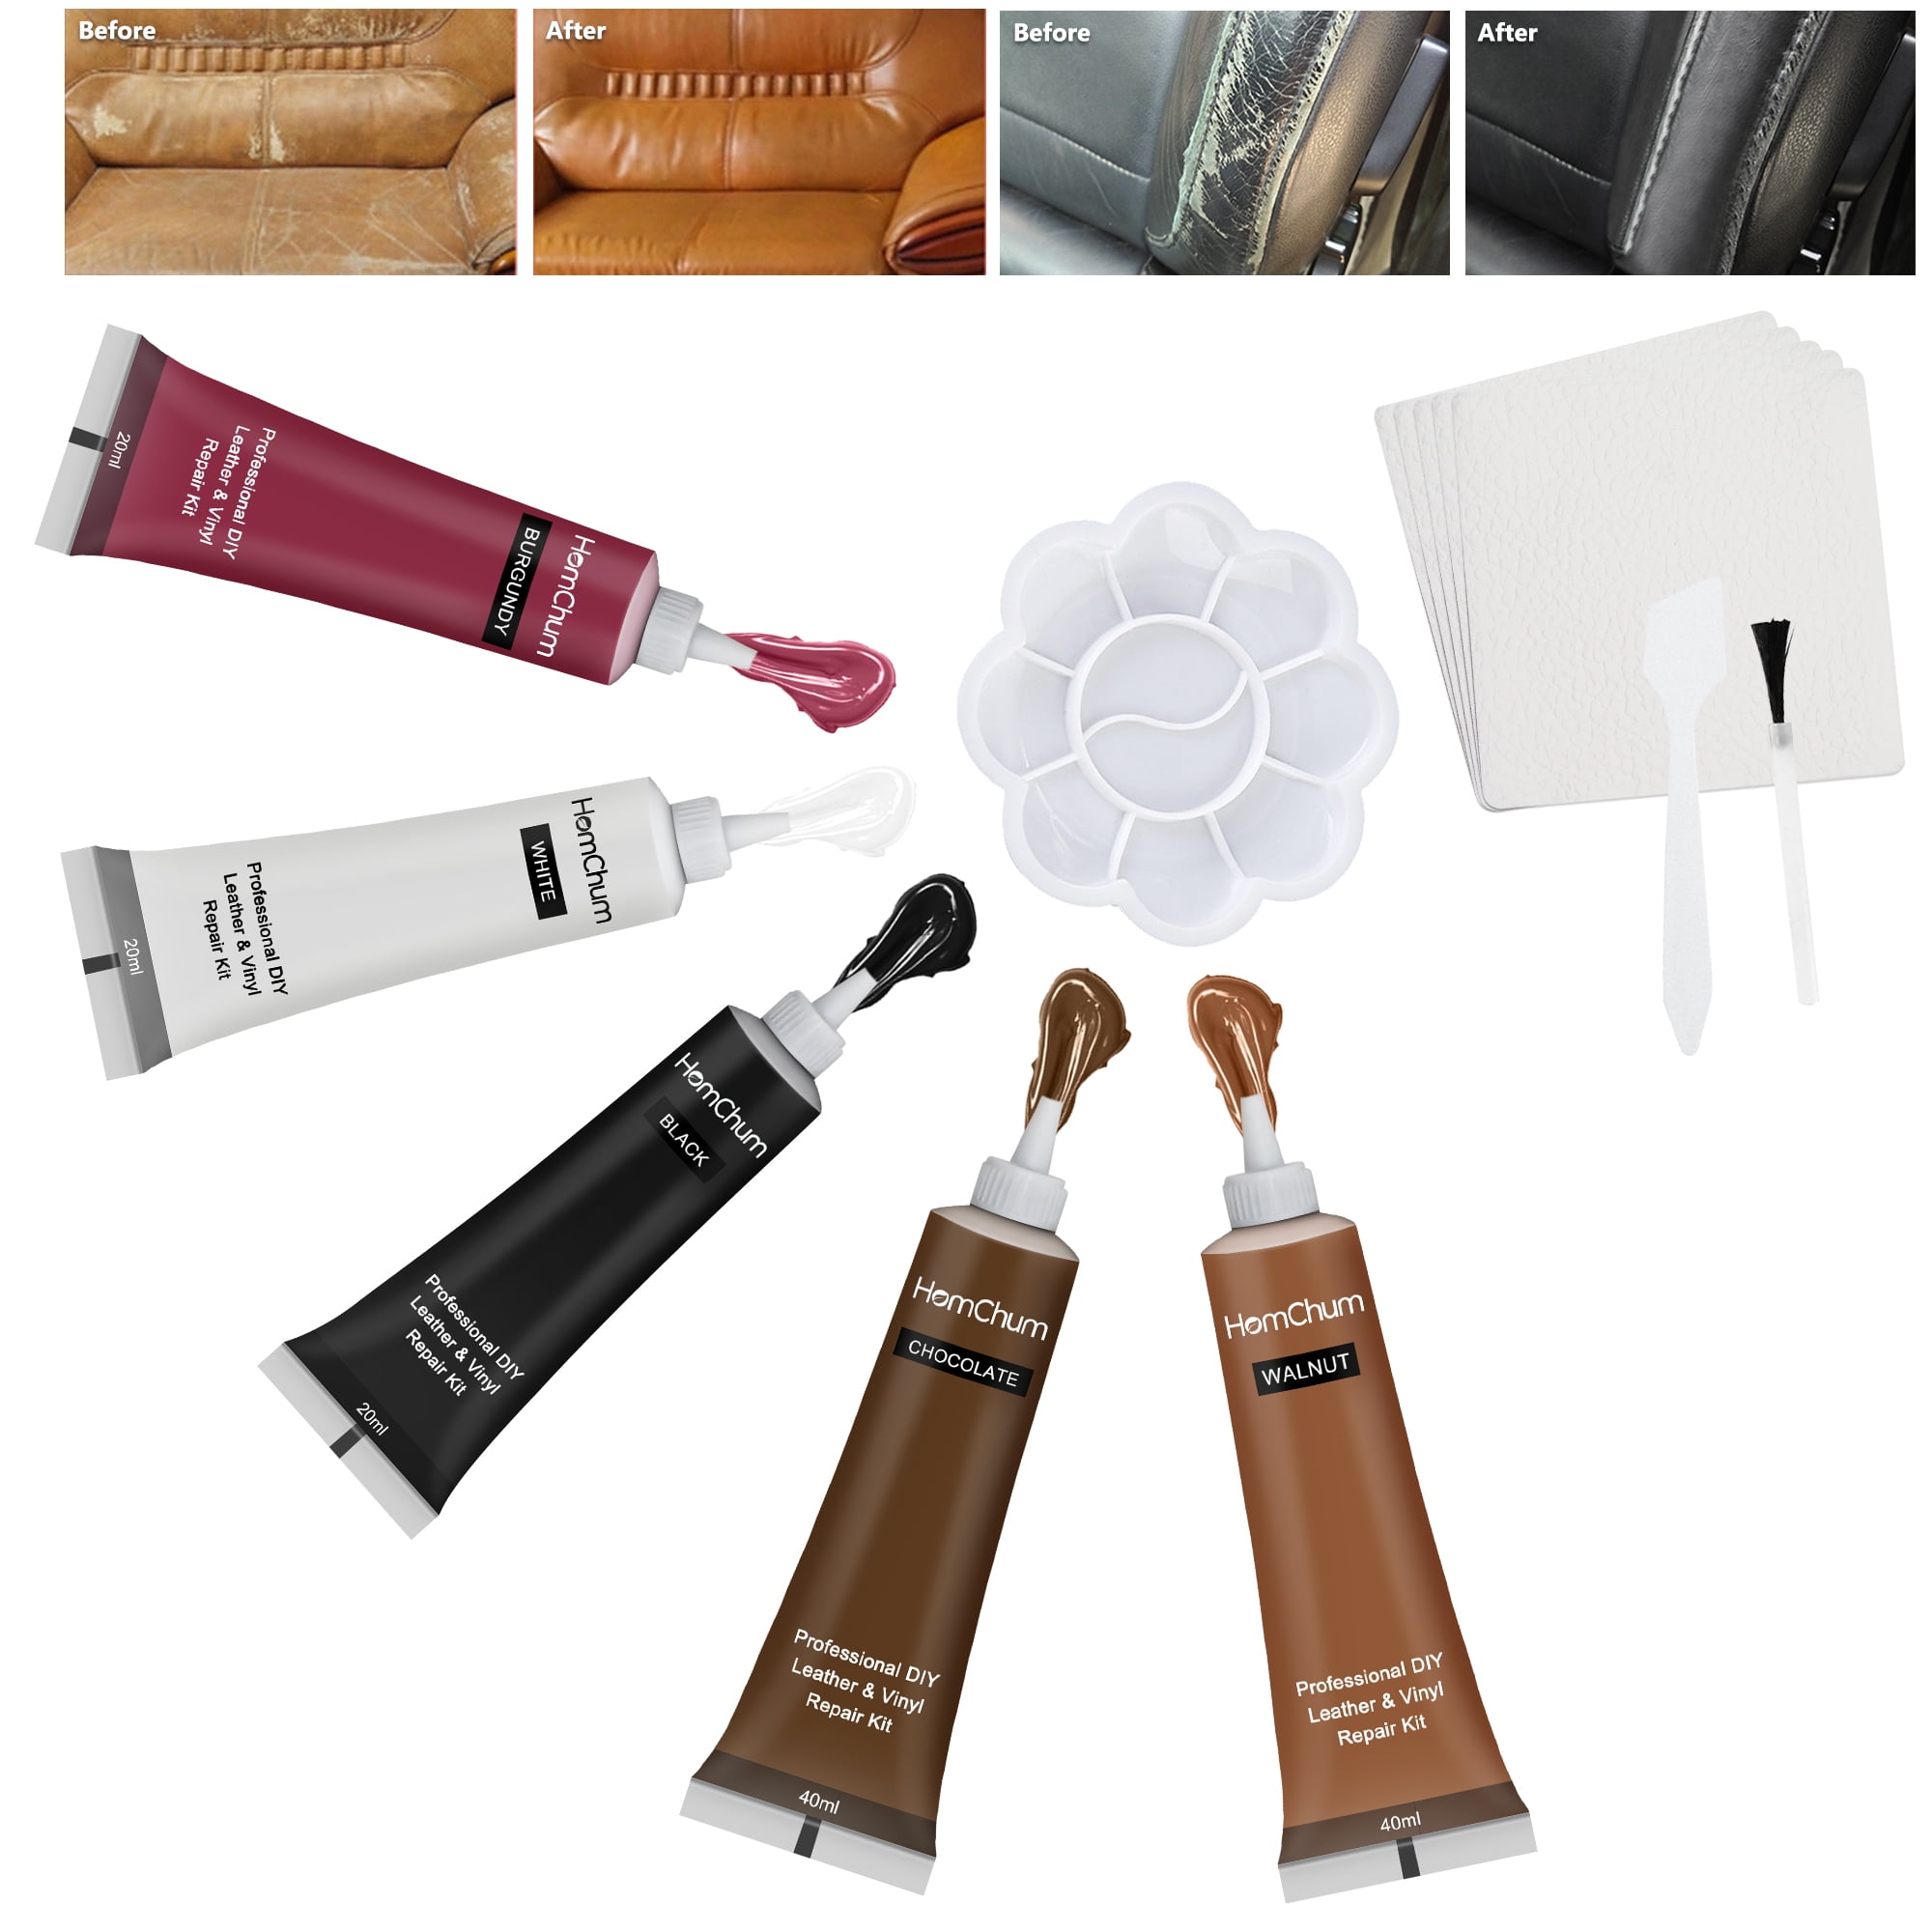 Start your own business Starter Kit-Leather and Vinyl Repair : Heat Cure  Leather & Vinyl Repair : Invisible Repair Products